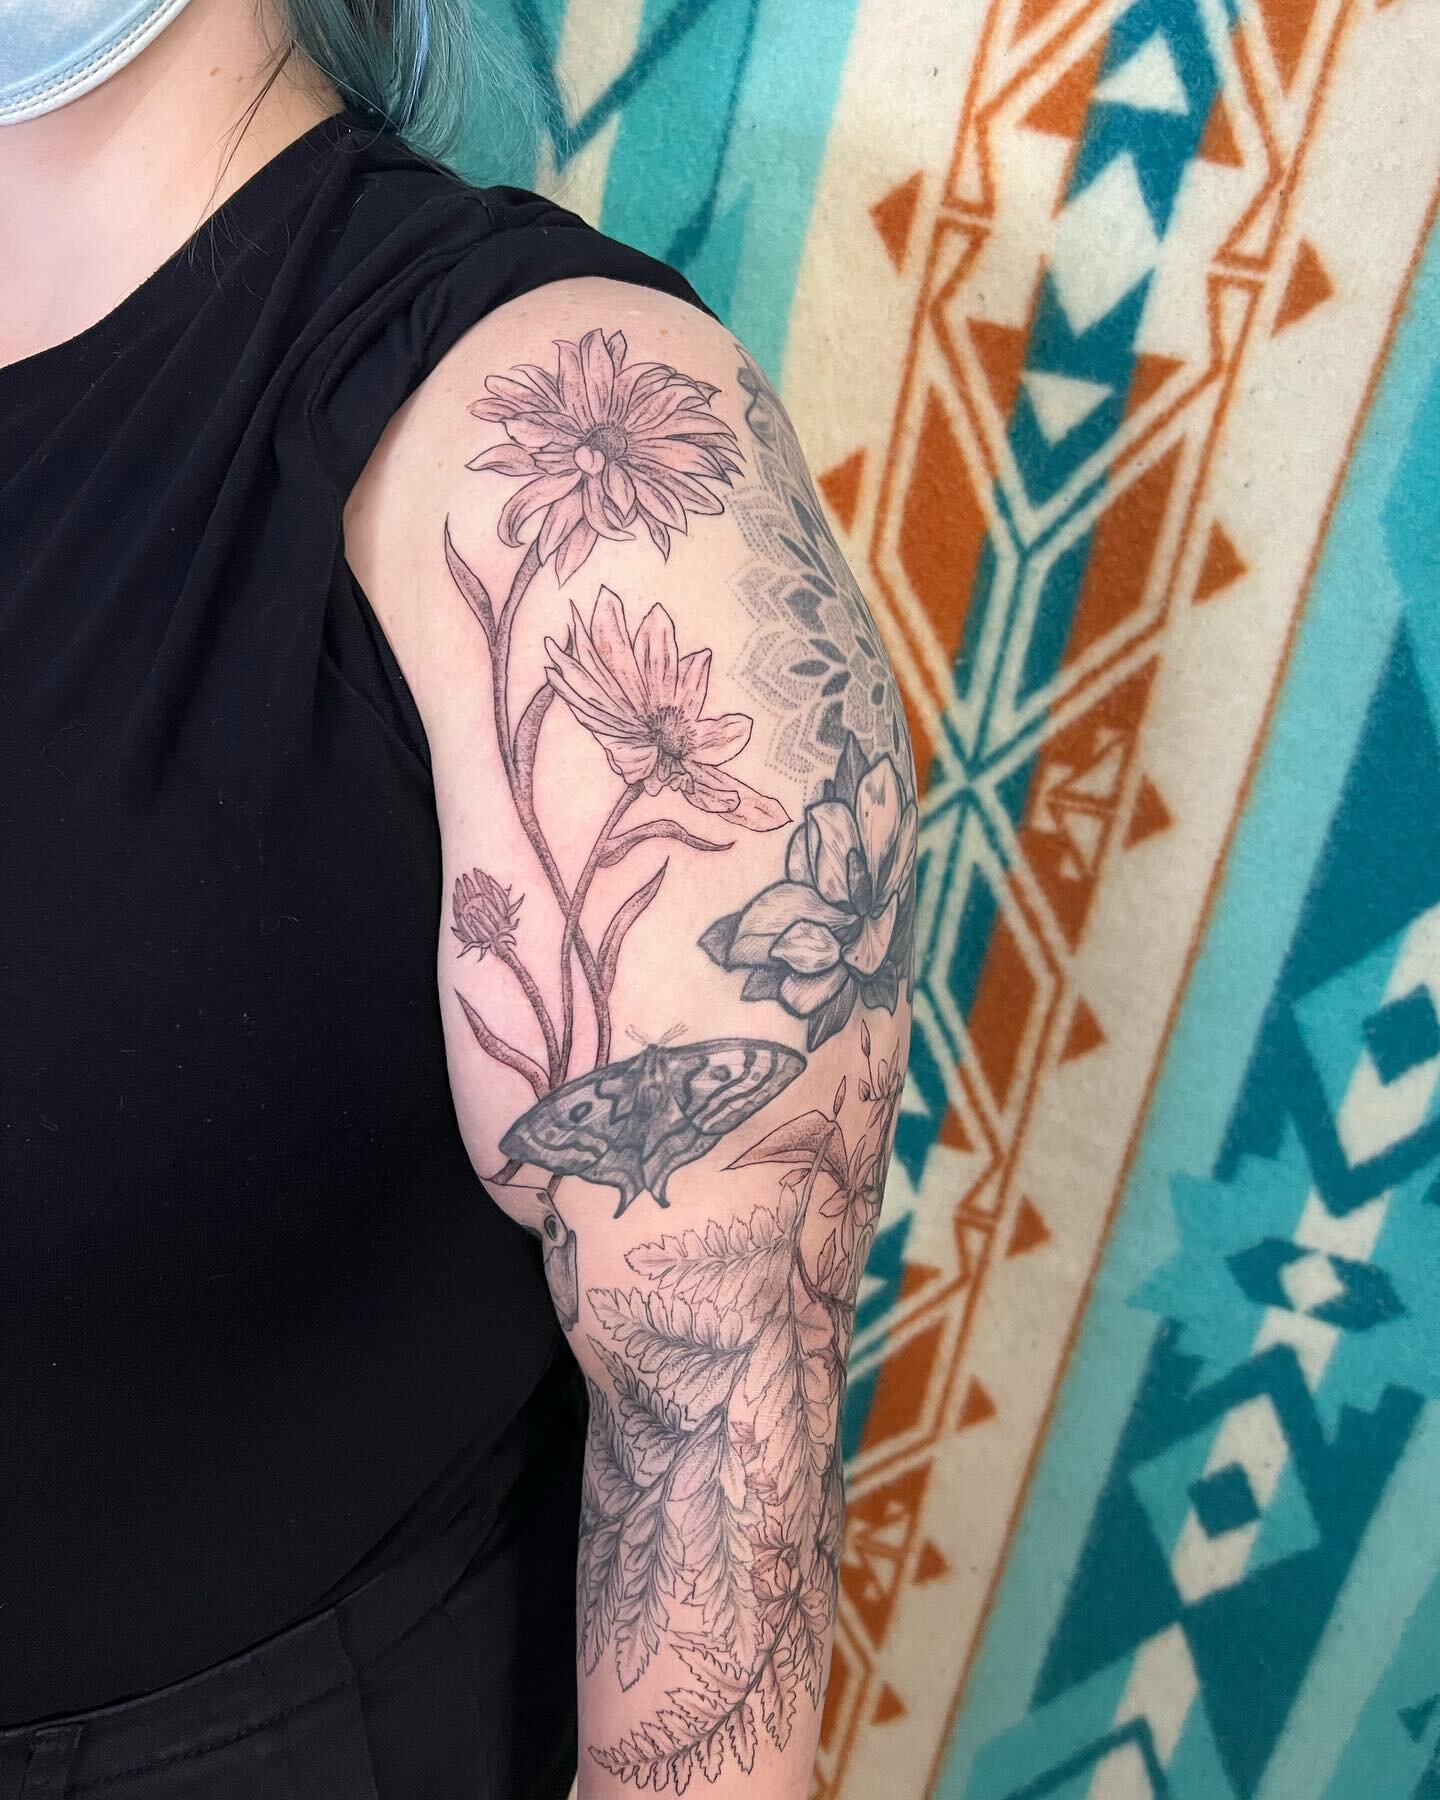 Finished adding all the plants to Allyson&rsquo;s Florida wildlife themed arm! We&rsquo;ve been slowly adding pieces in the 🌶️spiciest 🌶️ of placements. They are tough as heck and also laugh when things get more painful, which is such a delight. Dr